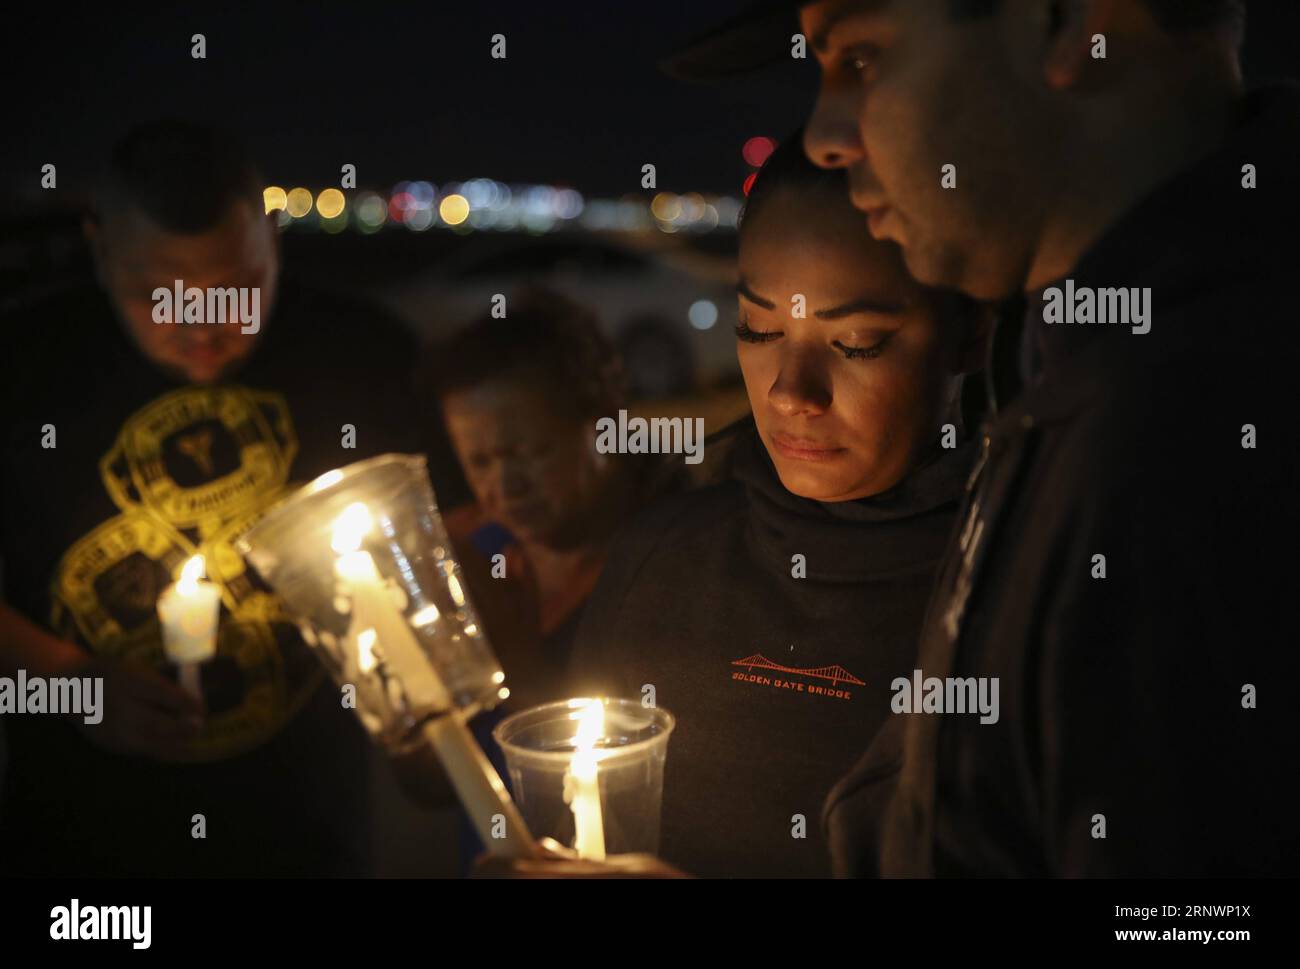 (171227) -- NEW YORK, Dec. 27, 2017 -- People attend a candle light vigil to mourn the victims of a mass shooting in Las Vegas, the United States, Oct. 2, 2017. At least 58 people were killed and 527 others wounded after a gunman opened fire on Oct. 1, 2017 during a concert in Las Vegas in the U.S. state of Nevada, the deadliest mass shooting in modern U.S. history. From Las Vegas shooting spree to Manhattan s truck attack, from Texas Hurricane Harvey to California s wildfires, from the advancing bull stock market to once-in-a-century total solar eclipse across U.S., seventeen photos covered t Stock Photo